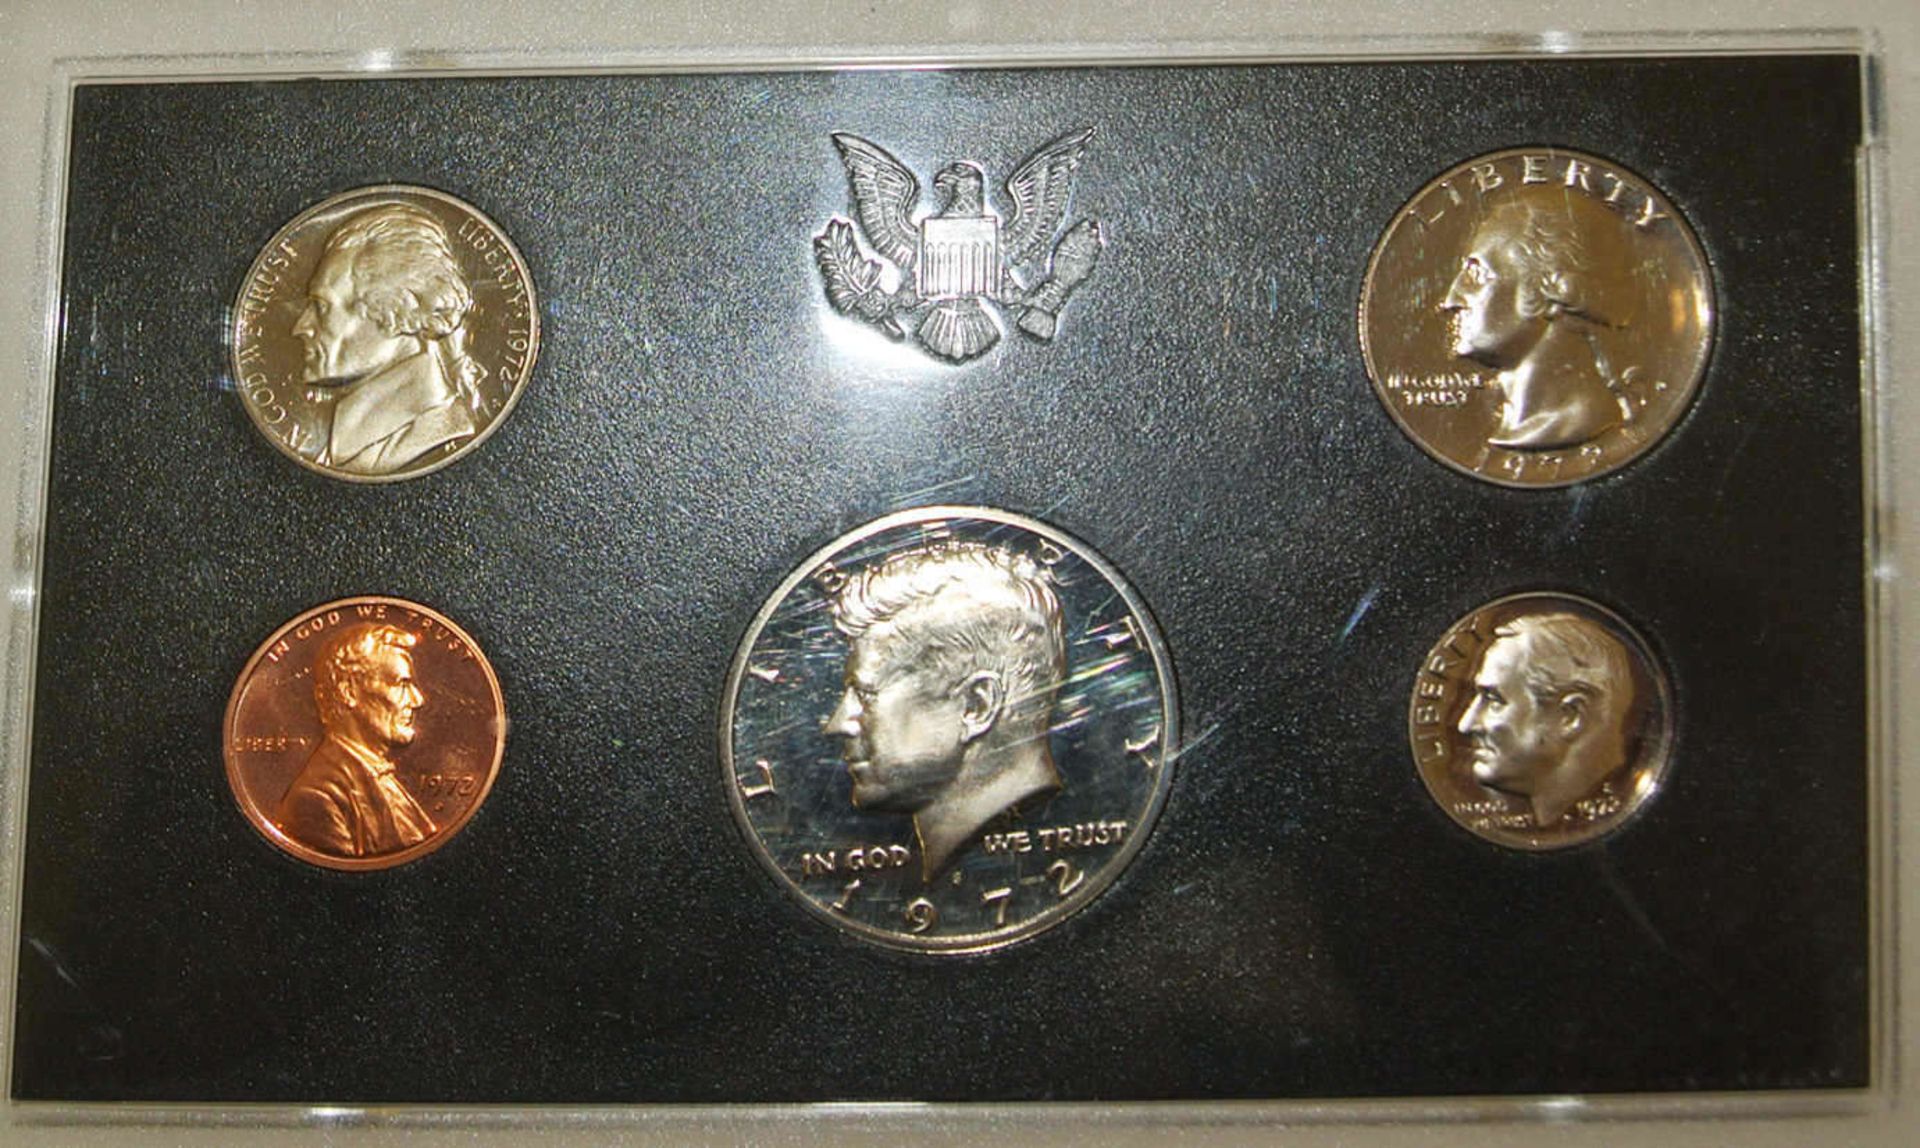 2 x USA Proof Sets, 1x 1972, sowie 1x 1981 2 x USA proof sets, 1x 1972, as well as 1x 1981 - Image 2 of 3